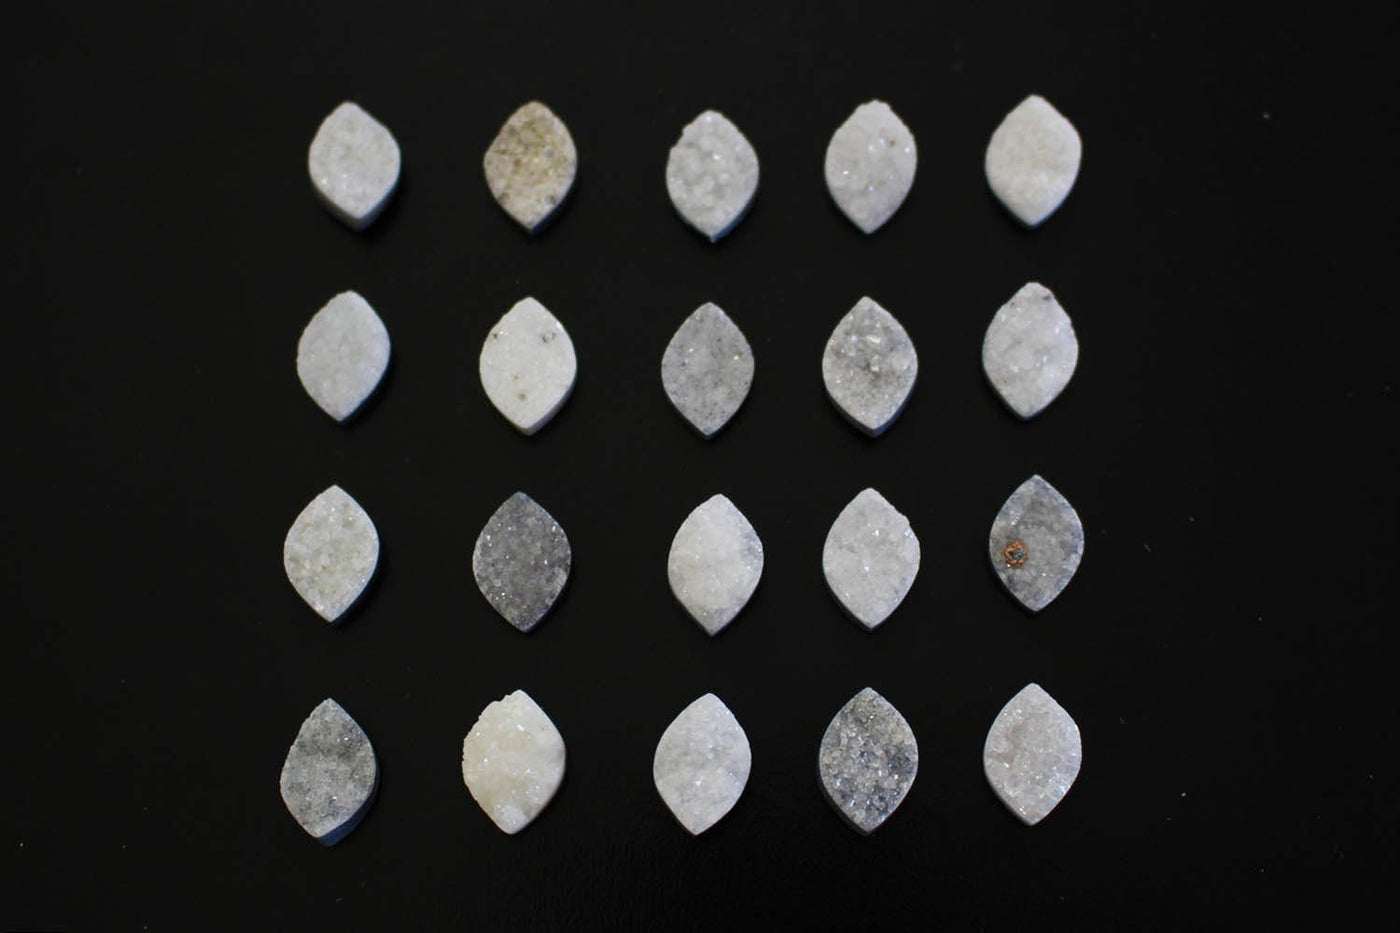 Cabochon - Marquise Druzy Cabochon -  in 4 rows of 5